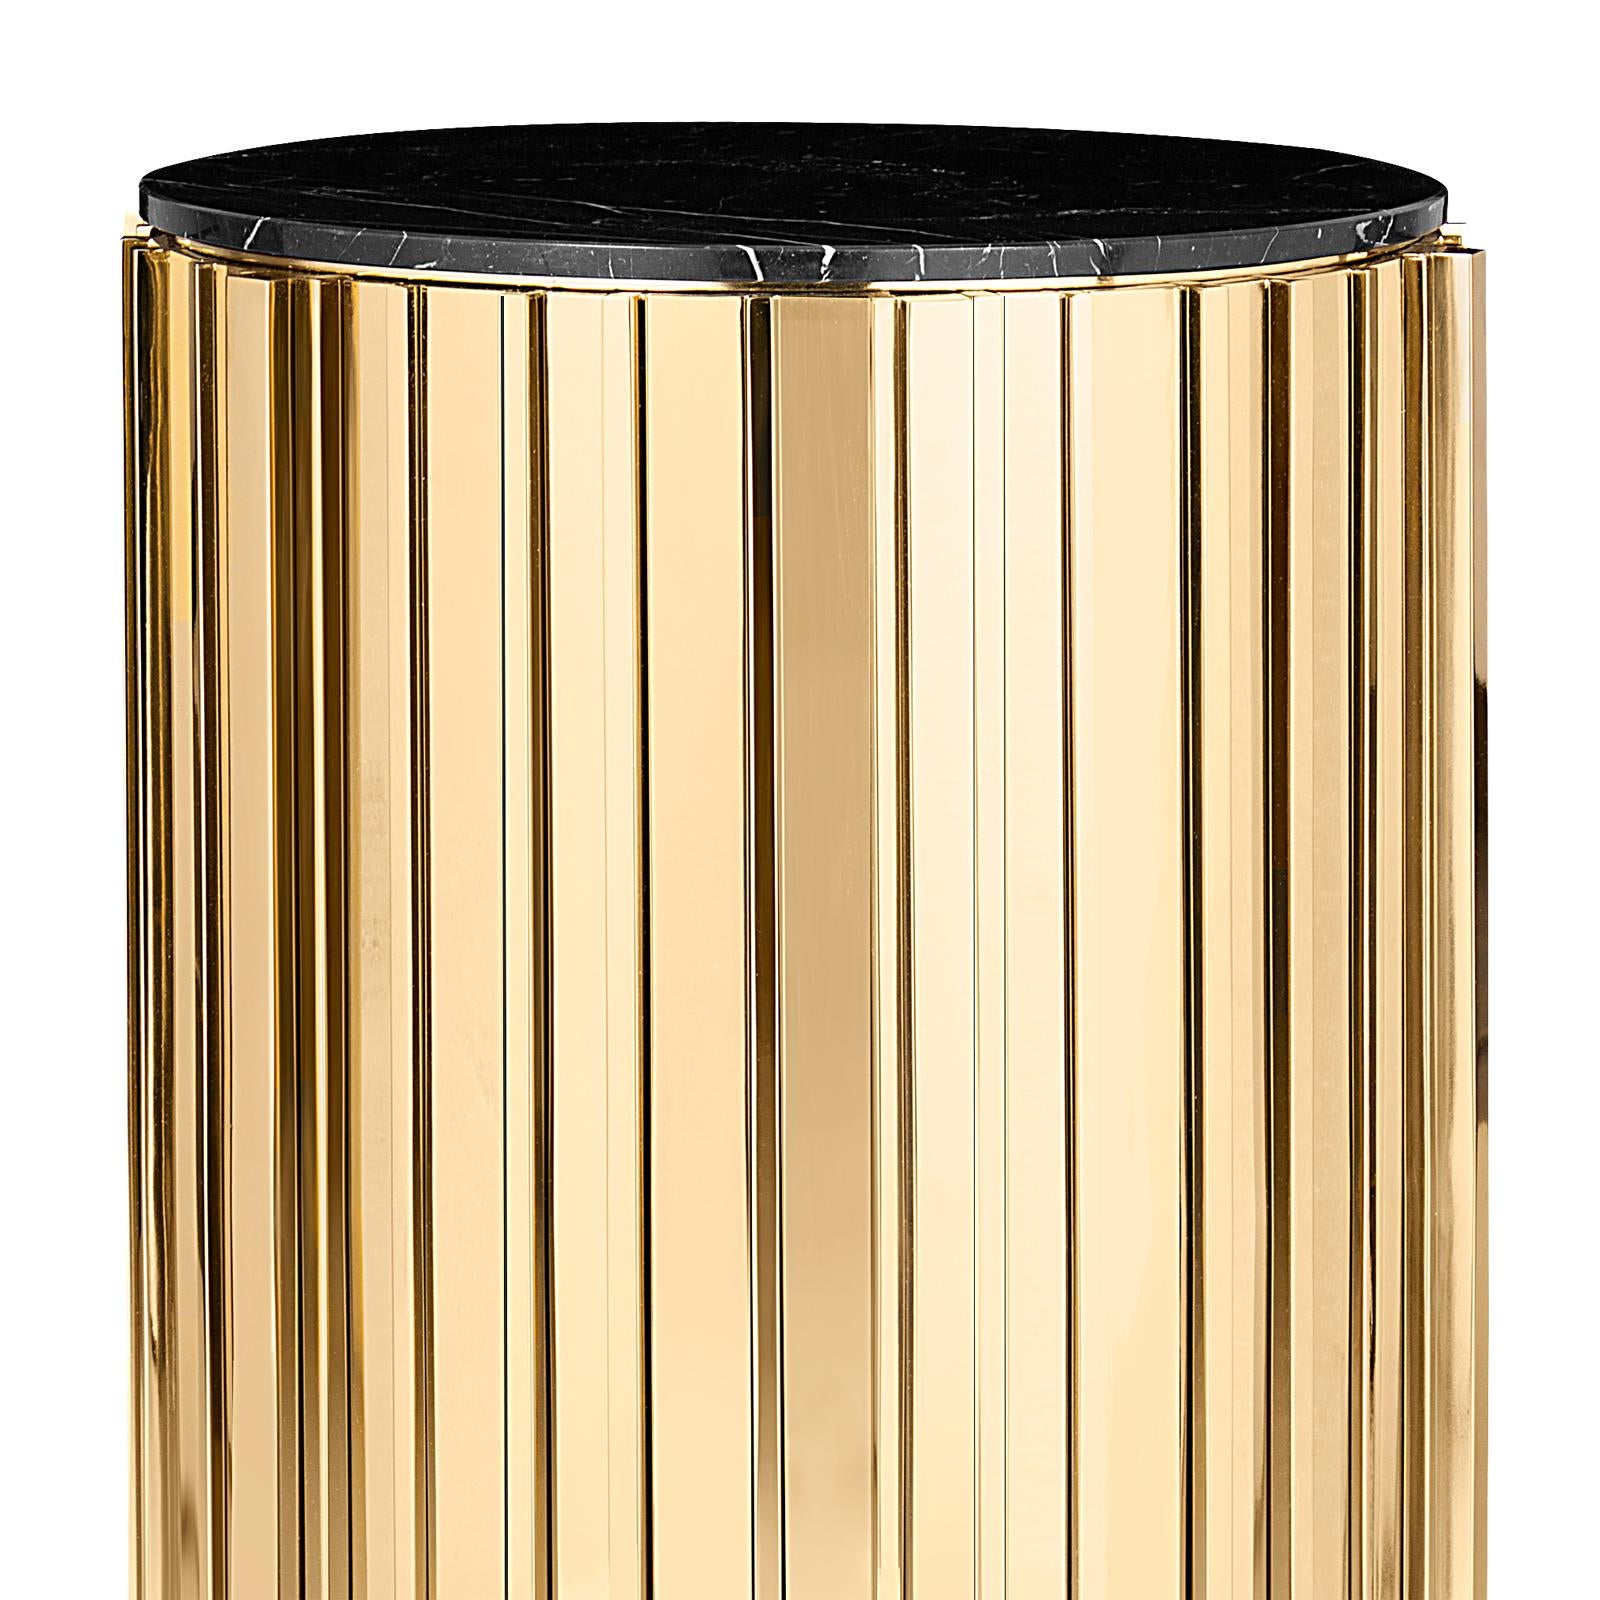 Partenon medium side table with structure in gold 
plated brass. With black marble top, Nero Marquina 
marble, in diameter 43 x H 61cm price: 10400,00€
Also available in Partenon small side table 
in diameter 50 x H 50cm, price: 8850,00€.